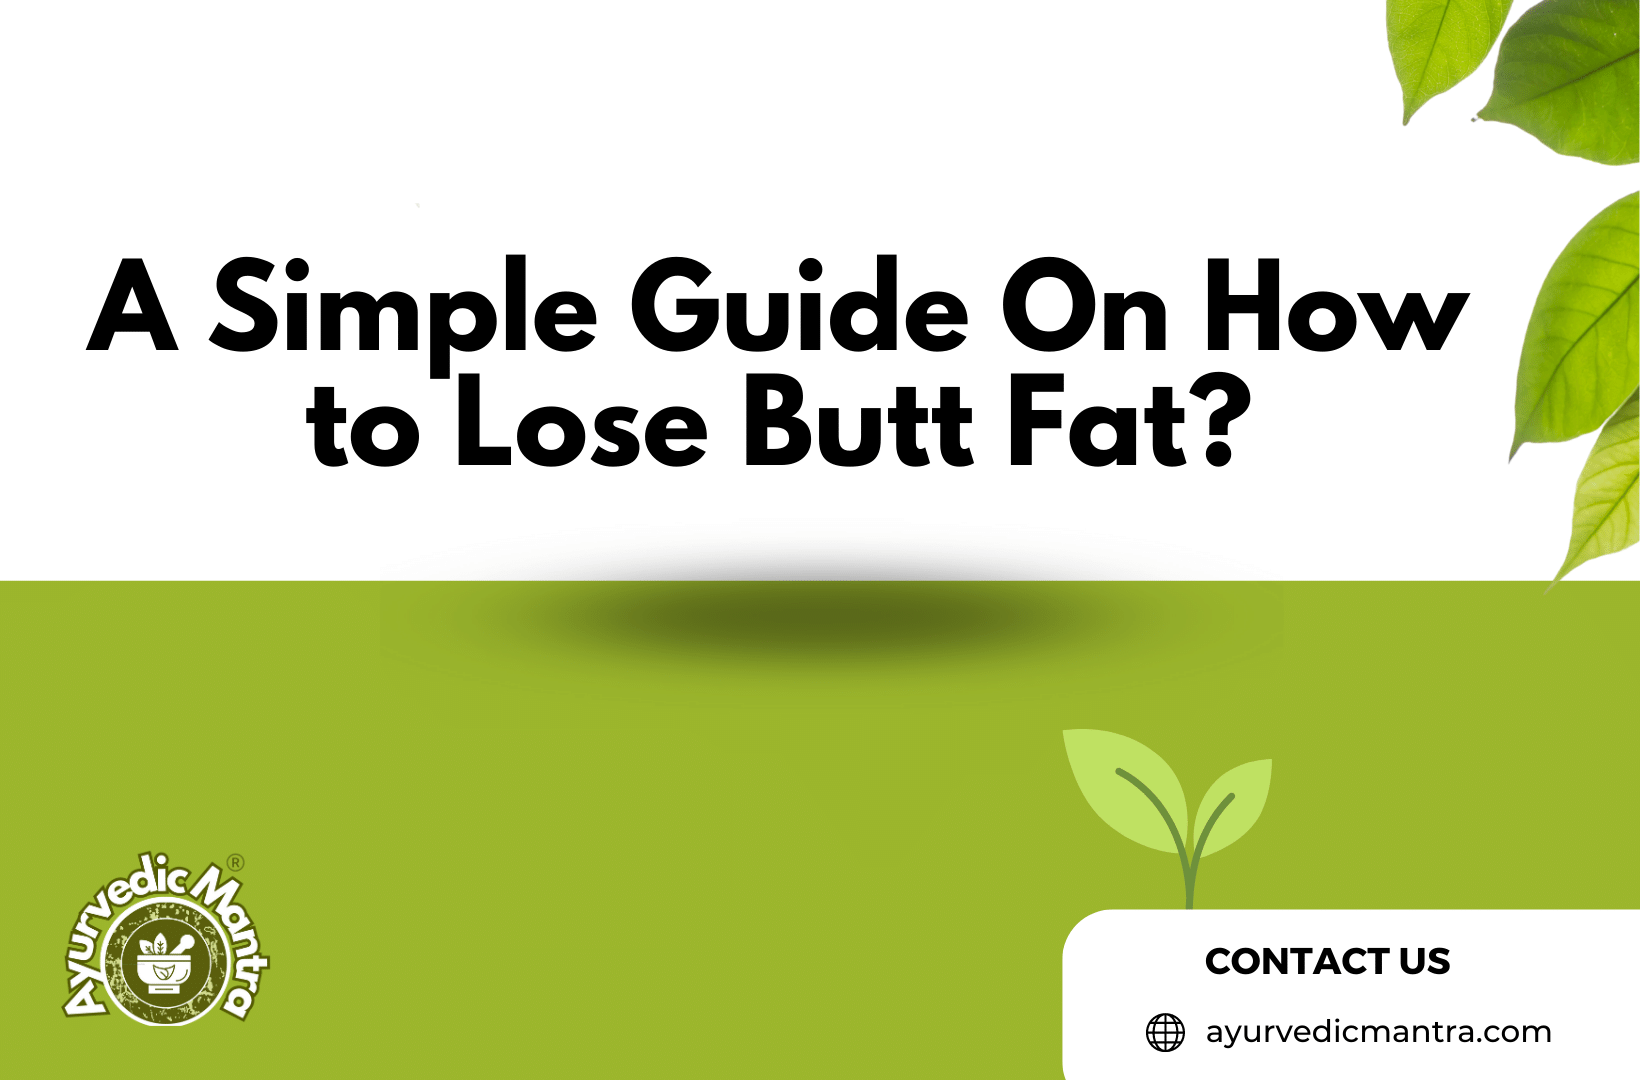 A Simple Guide On How to Lose Butt Fat